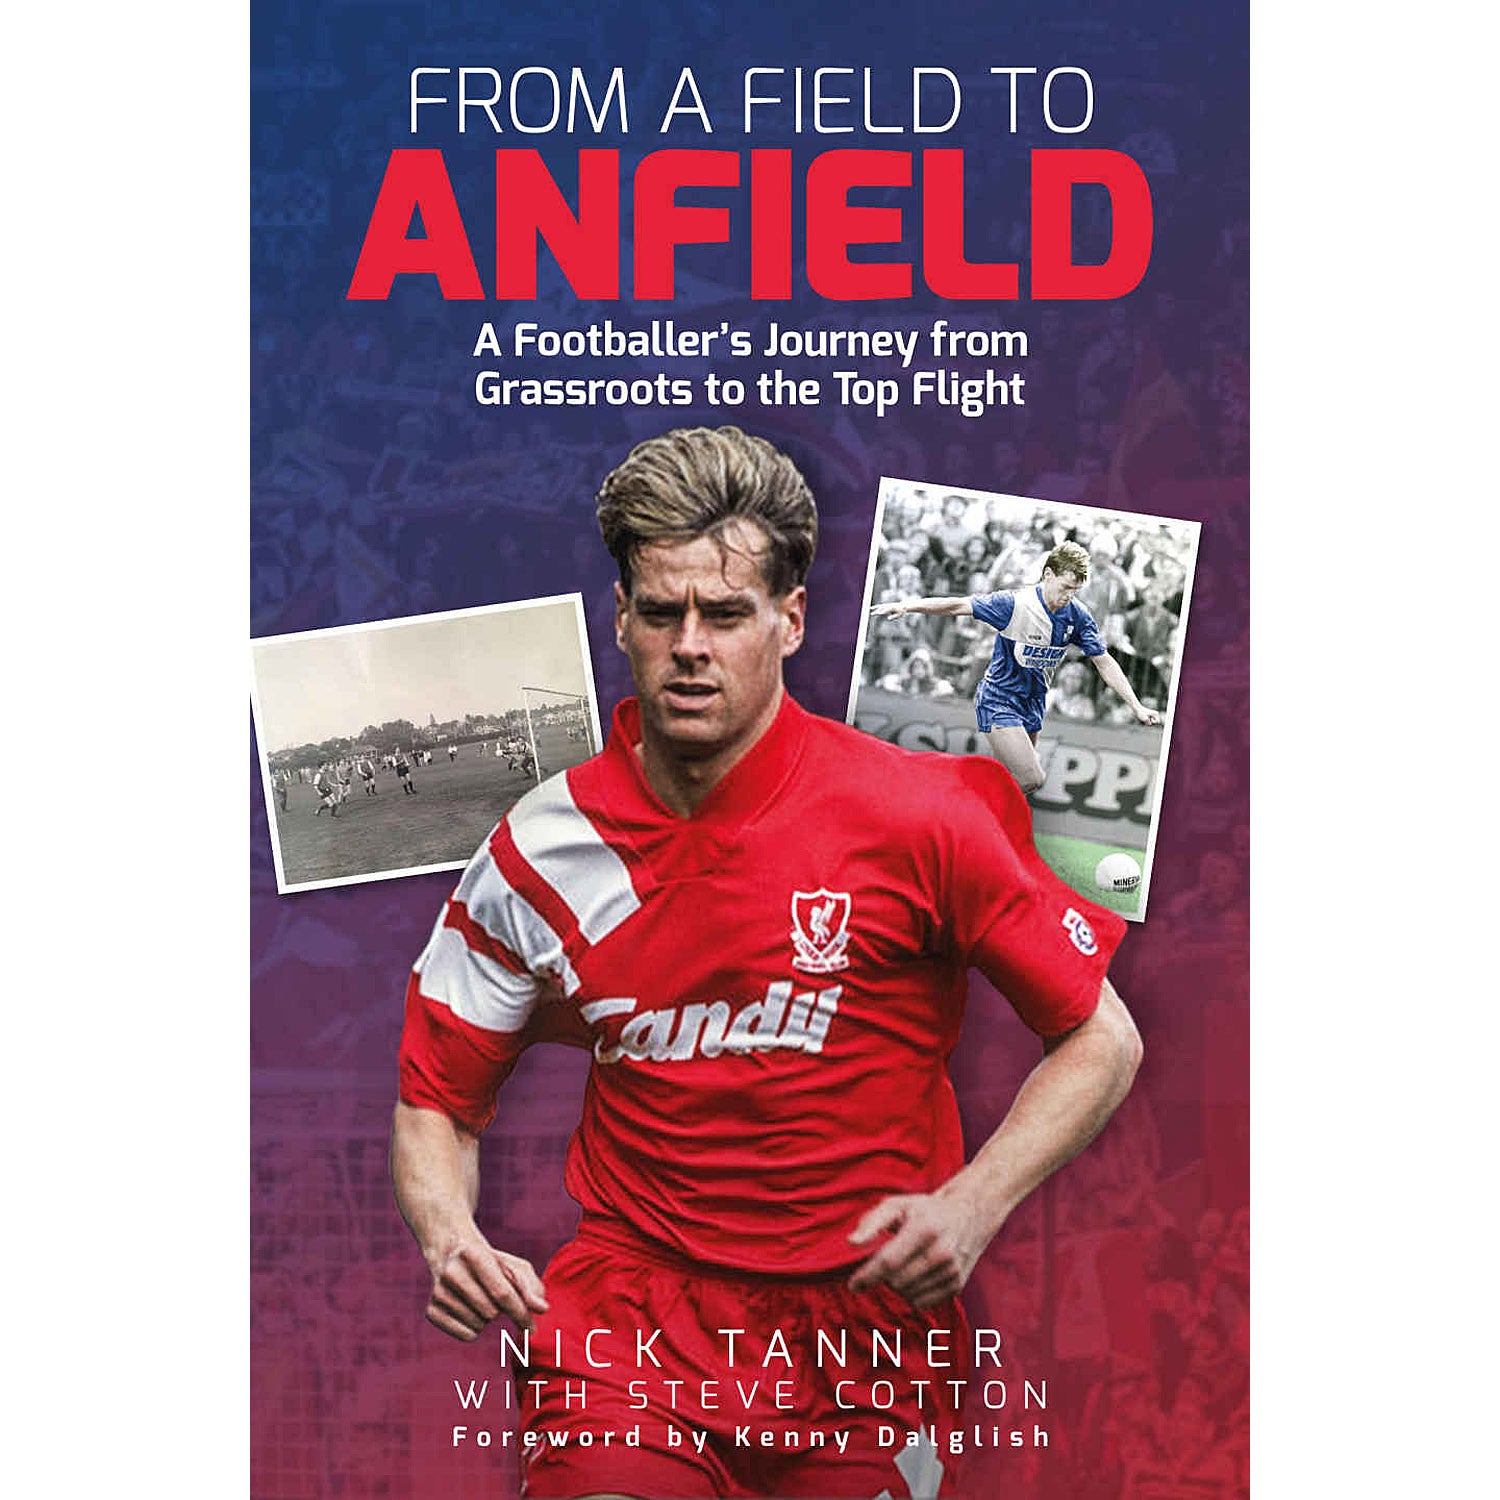 From A Field to Anfield – Nick Tanner – A Footballer's Journey from Grassroots to the Top Flight